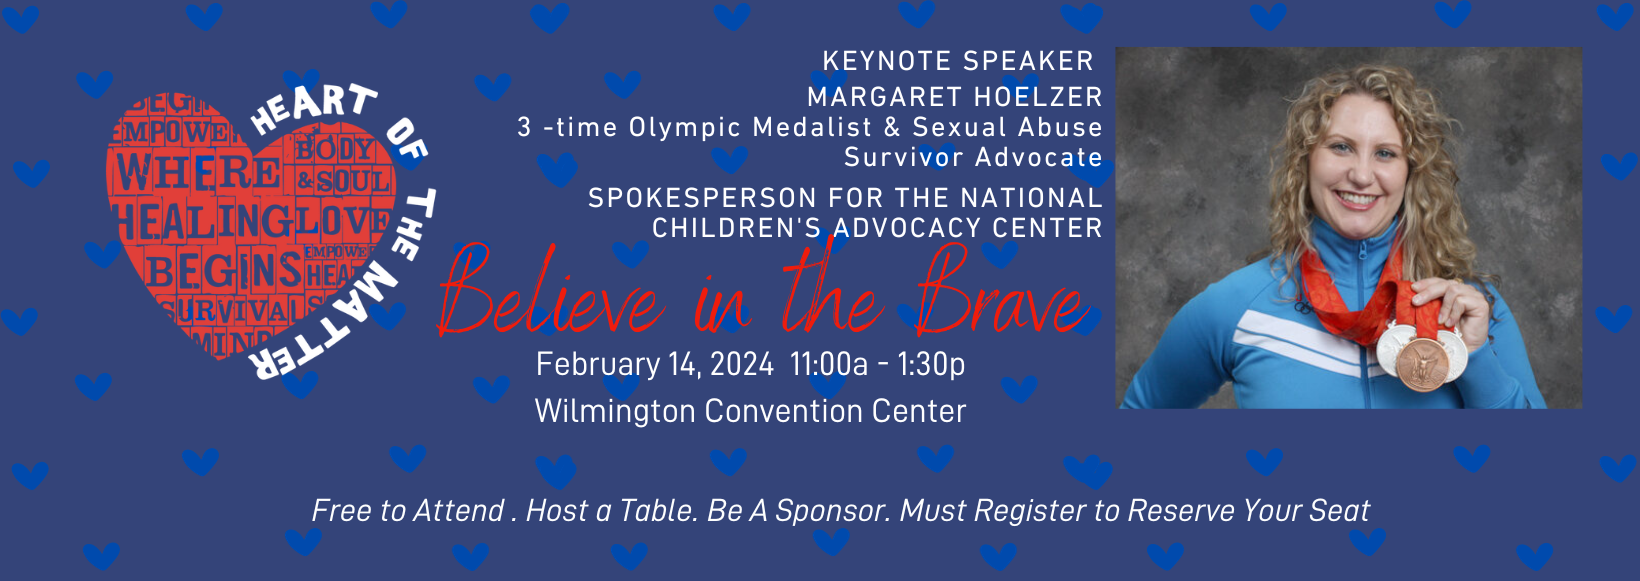 Heart of the Matter & Tin Man Awards Luncheon February 14, 2023 1100a - 130p Wilmington Convention Center